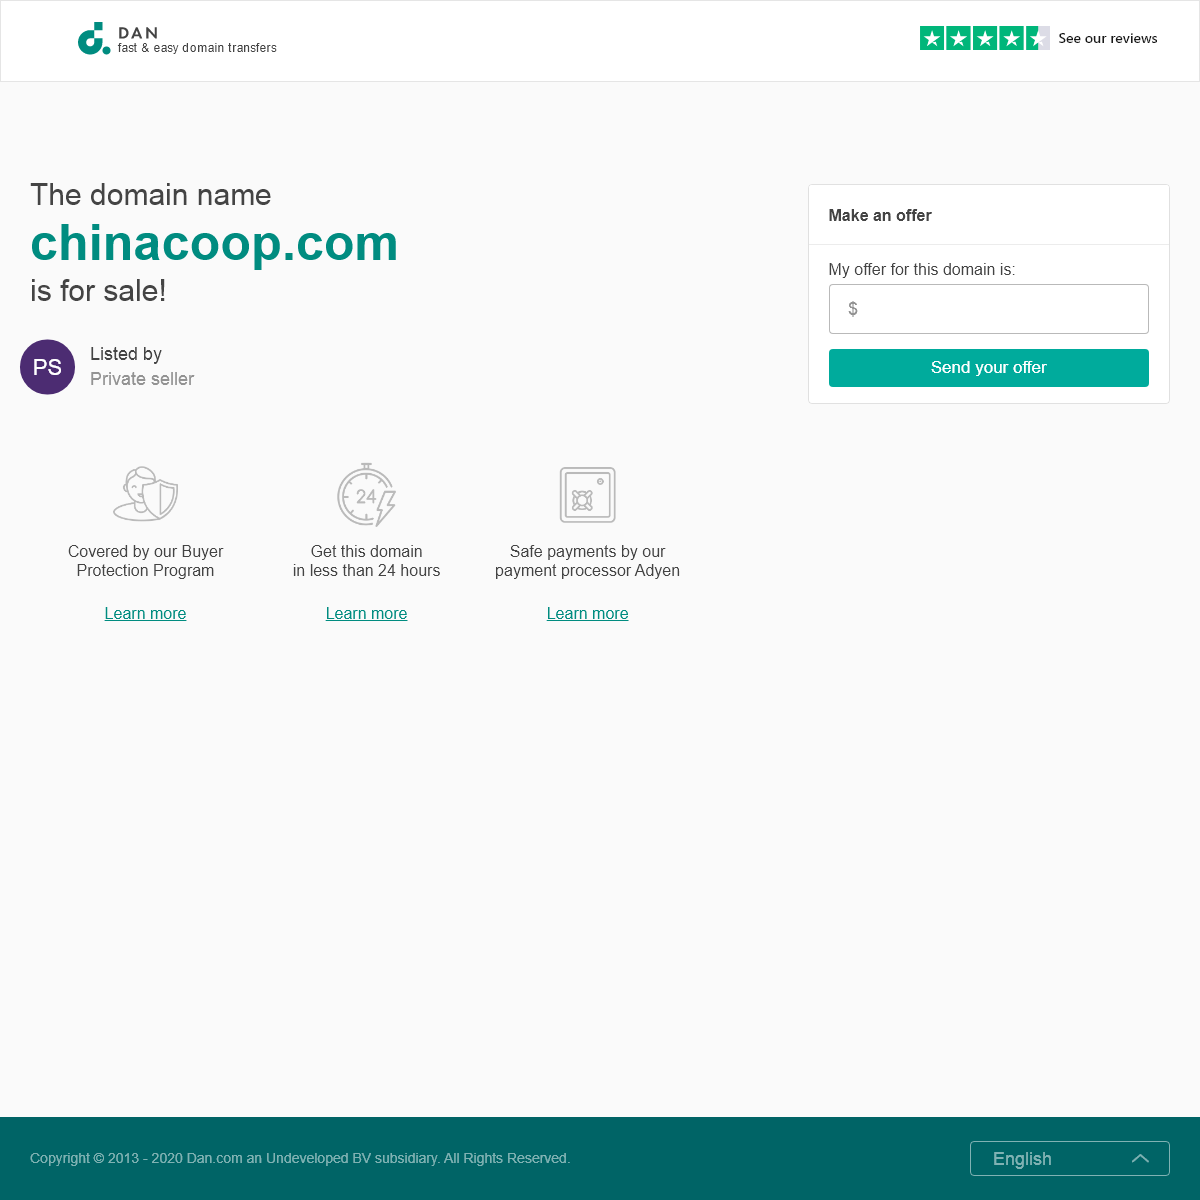 A complete backup of chinacoop.com